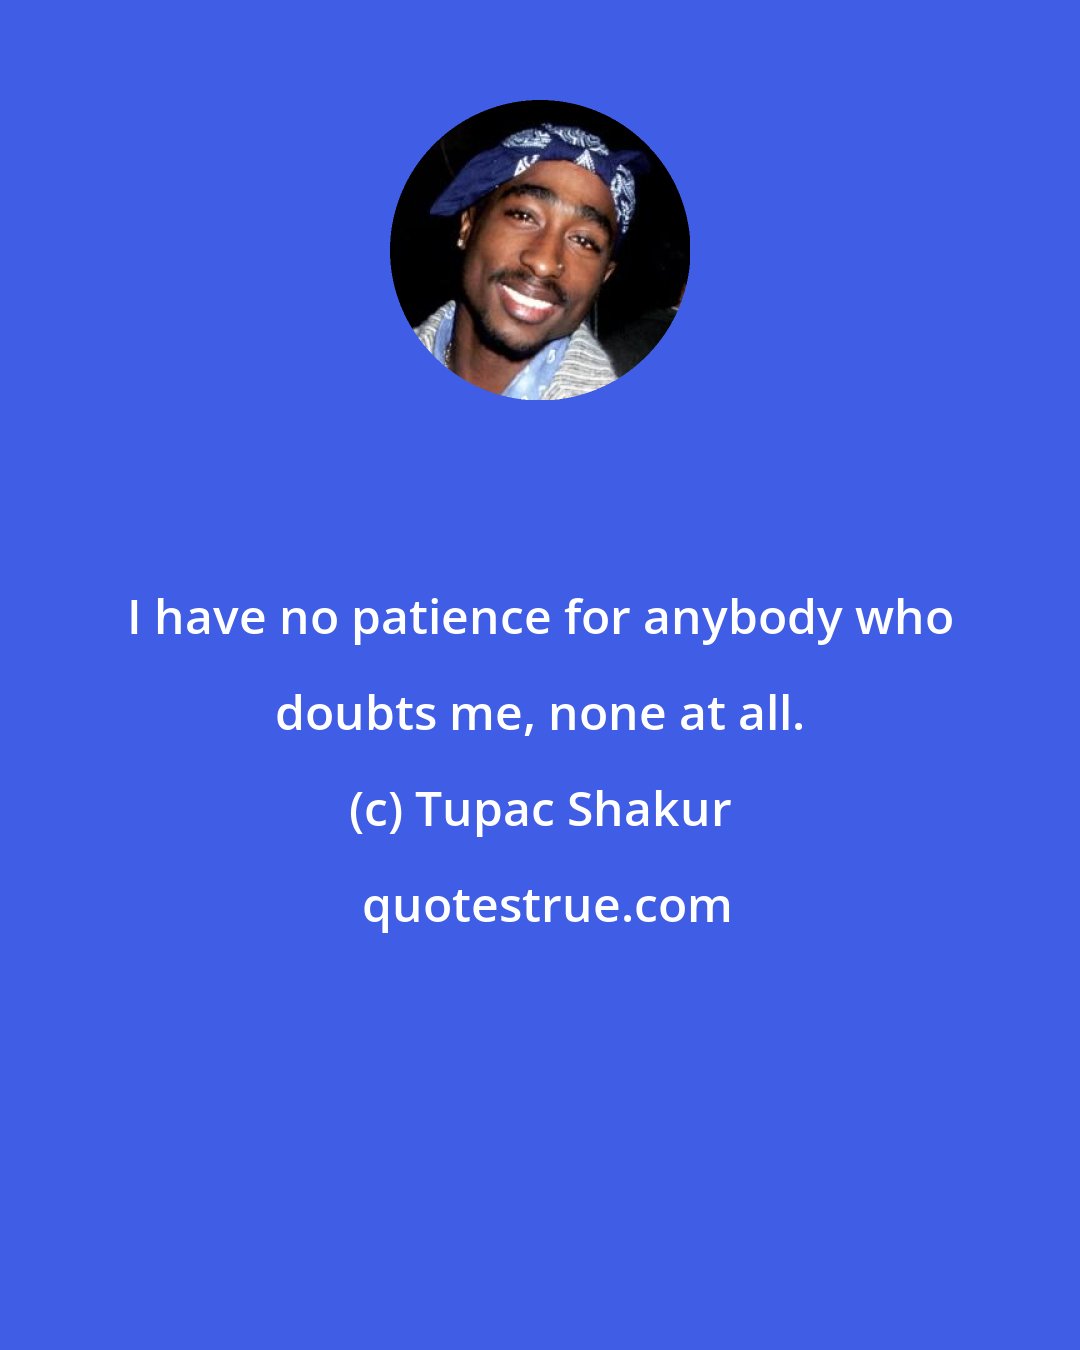 Tupac Shakur: I have no patience for anybody who doubts me, none at all.